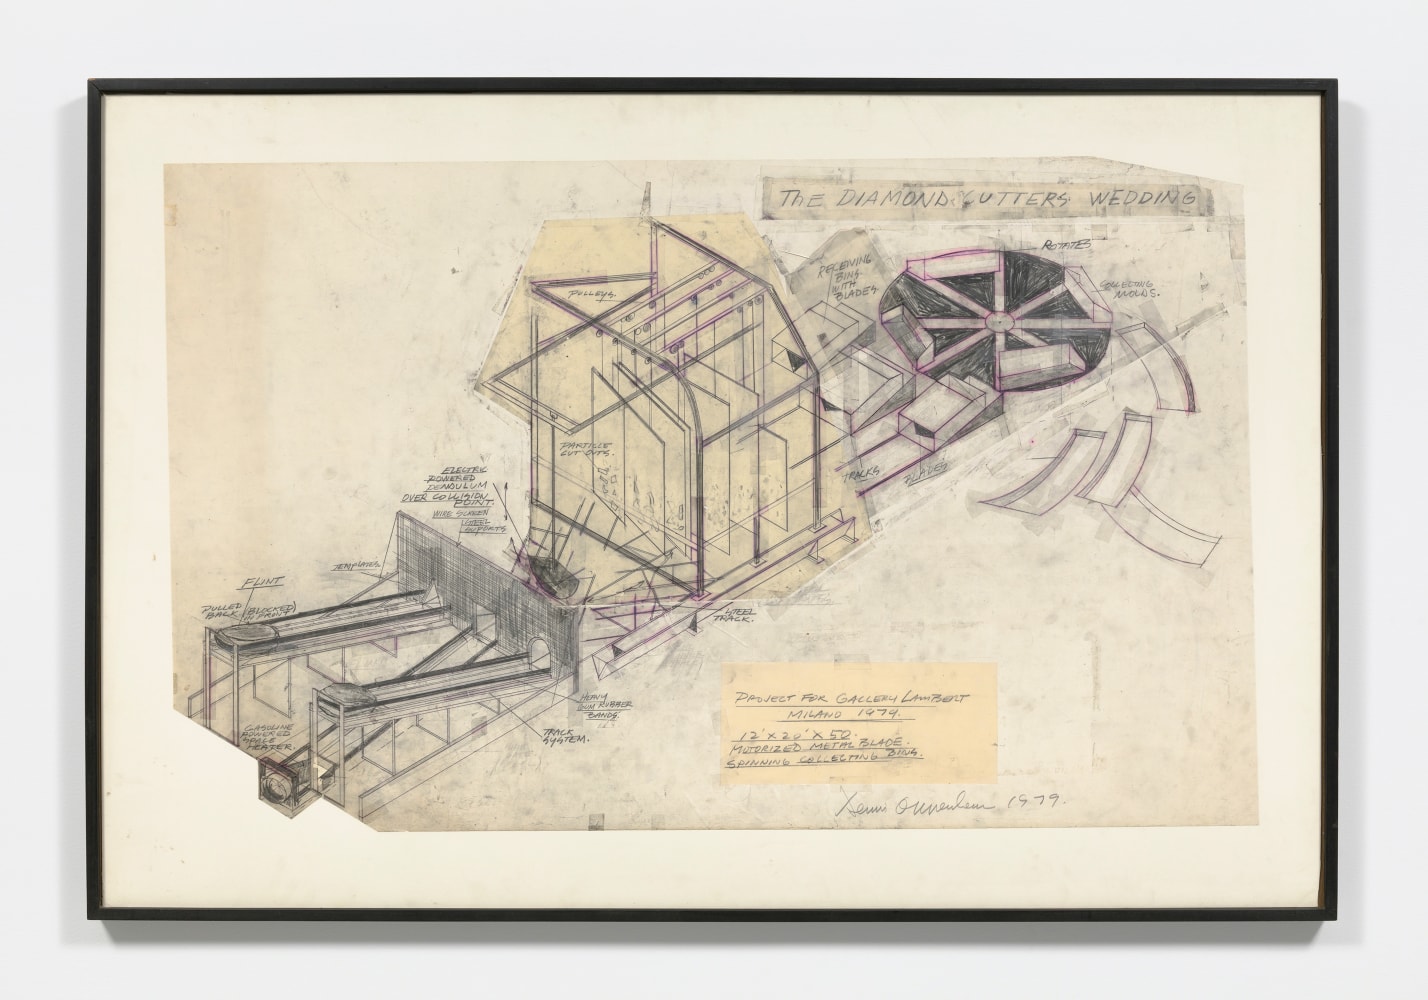 Dennis Oppenheim pencil sketch of the inner workings of a diamond cutter with highlights of pink.